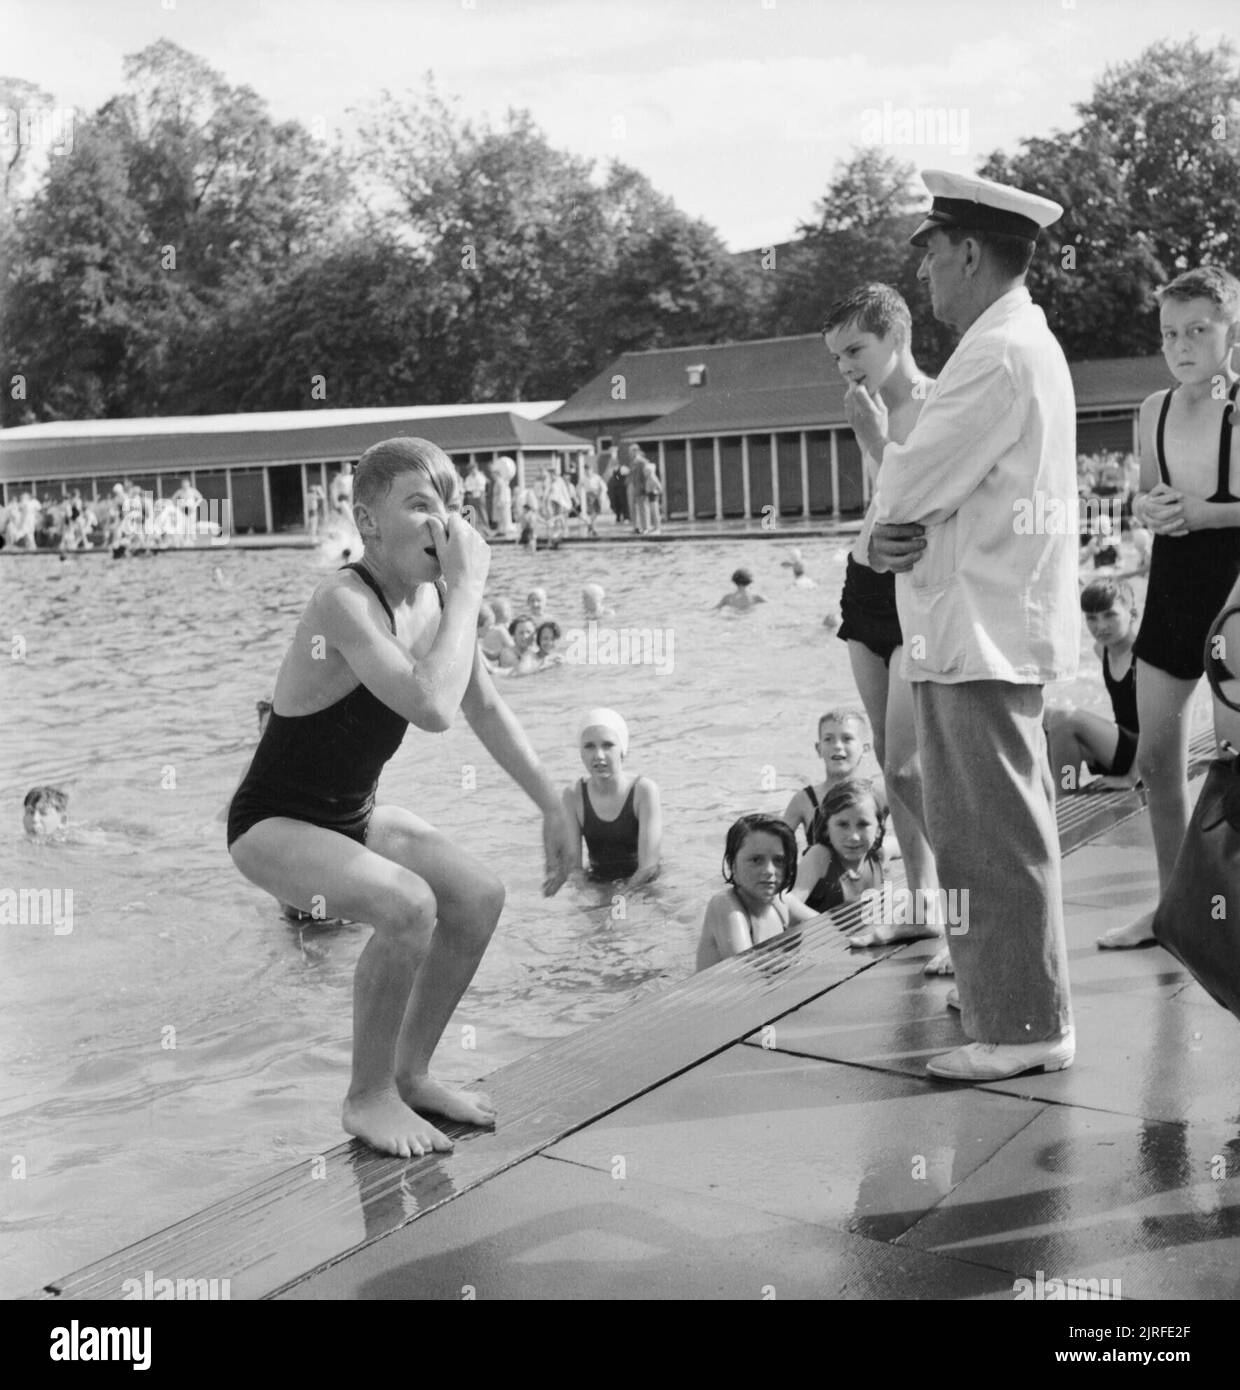 Bathing Pool- Entertainment and Relaxation in the Open Air, Guildford, Surrey, England, 1943 A young boy holds his nose tightly to prevent any water getting up his nostrils, as he prepares to jump backwards into the water at Guildford Lido. On the poolside, the guard or warden can be seen, overseeing the proceedings. A group of the boy's friends can be seen in the water, looking at the camera, enjoying a swim on a sunny afternoon. Stock Photo